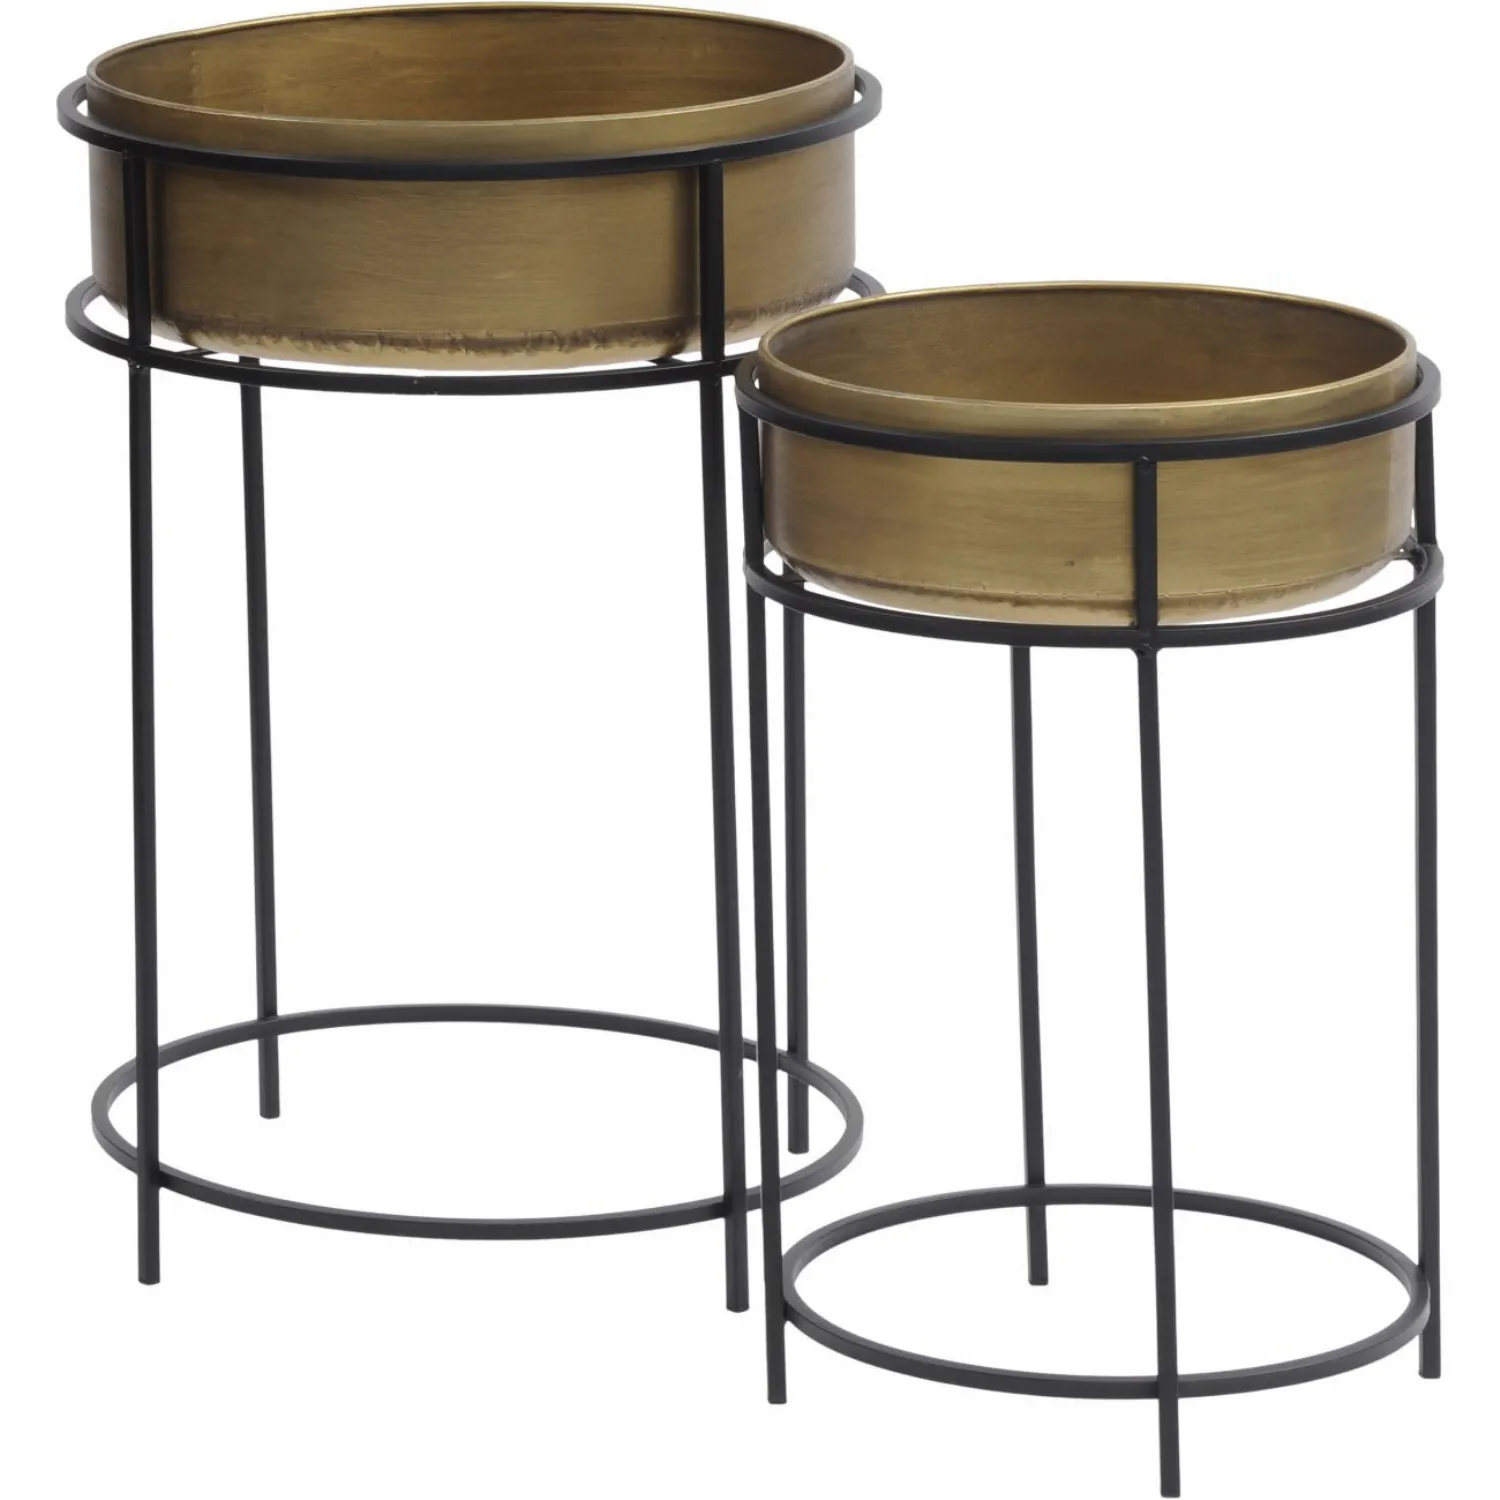 Pair of Gold Planters Tall Black Metal Stands